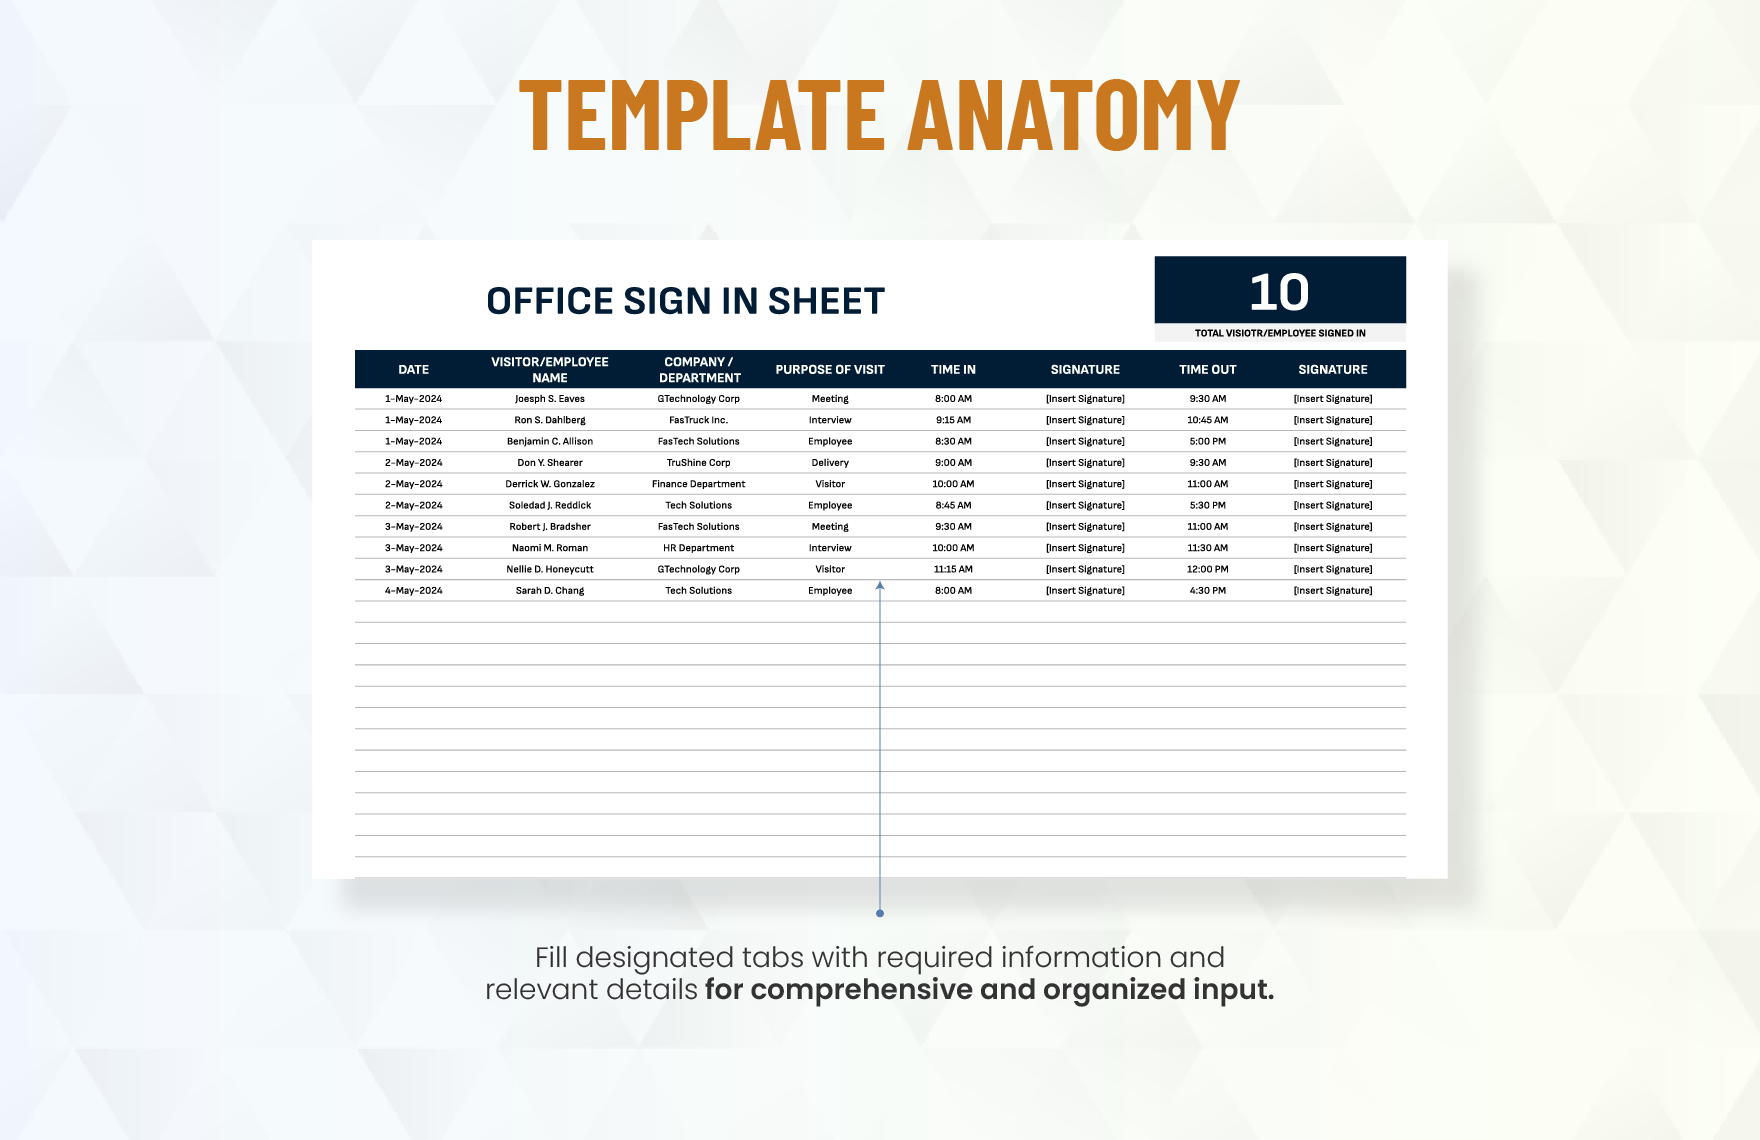 Office Sign in Sheet Template